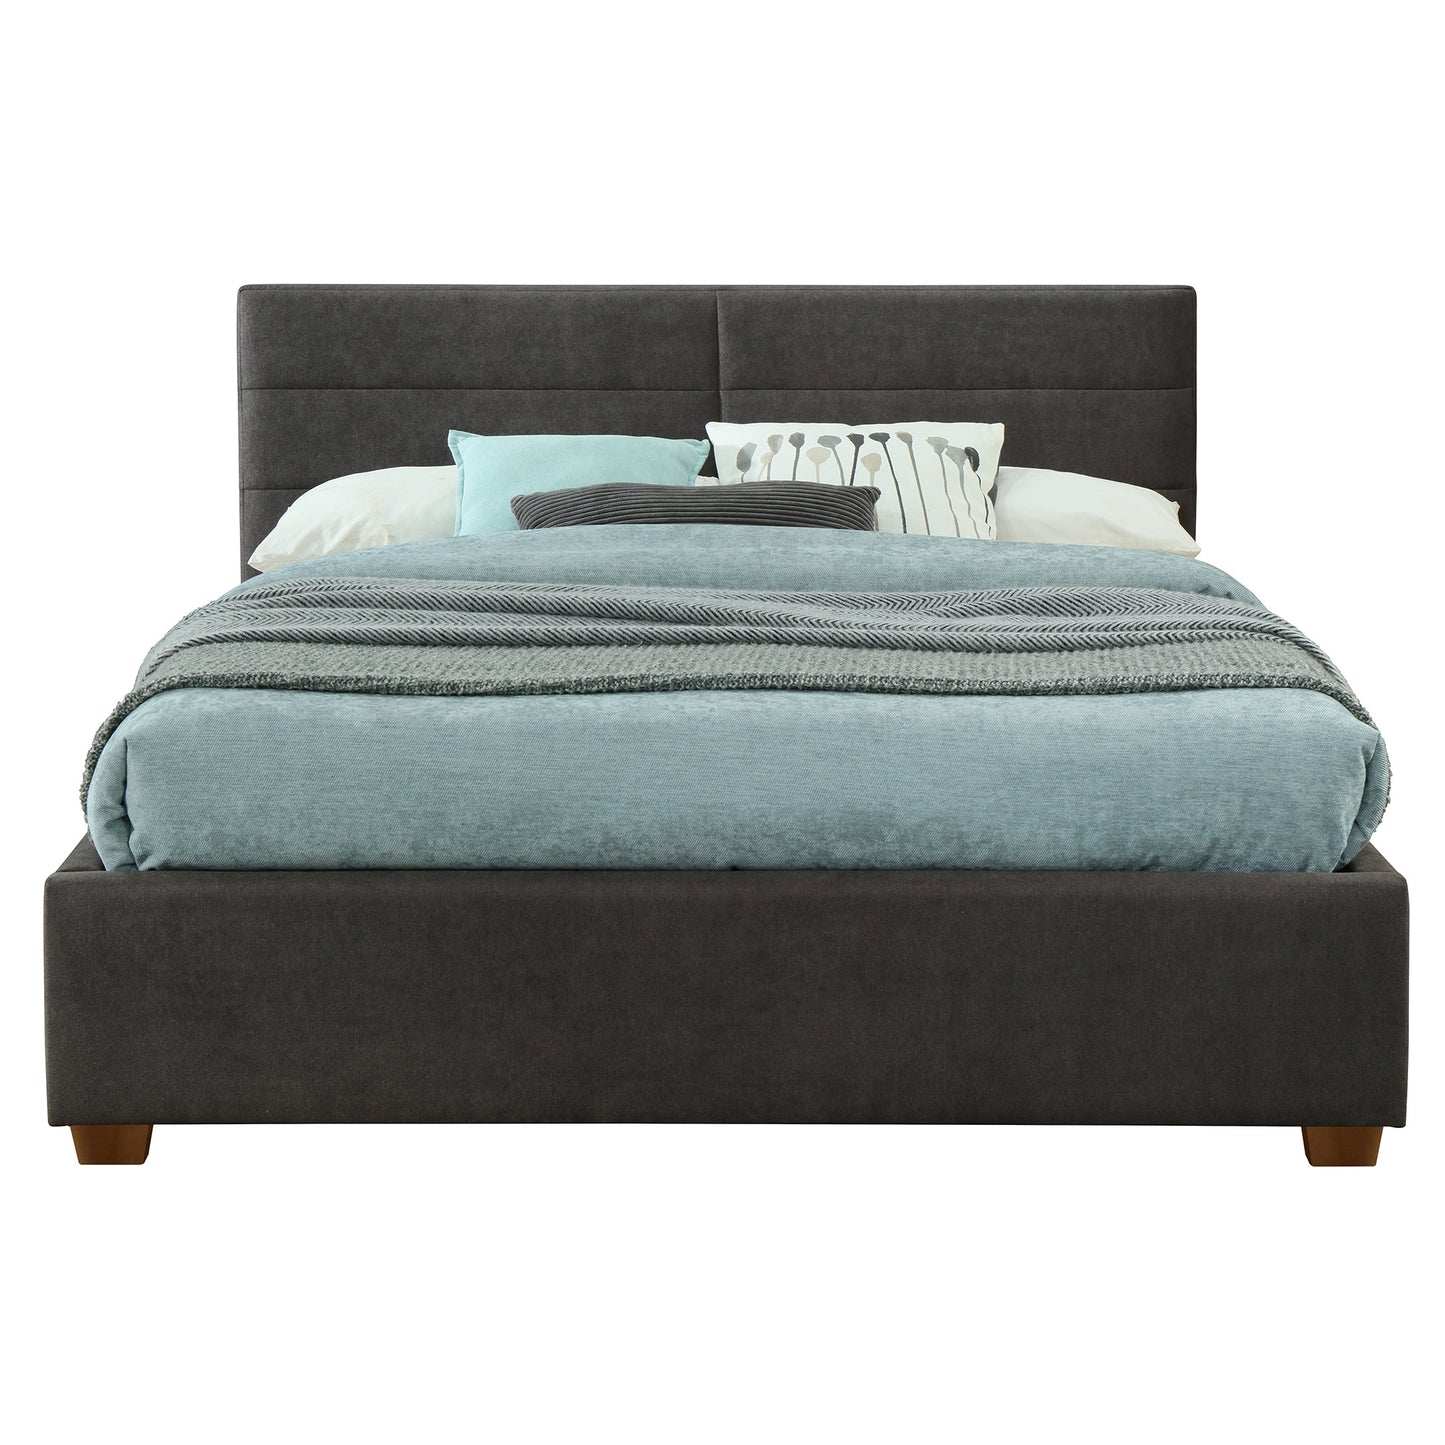 Emilio 60" Queen Platform Bed W/Drawers in Charcoal - Dreamart Gallery